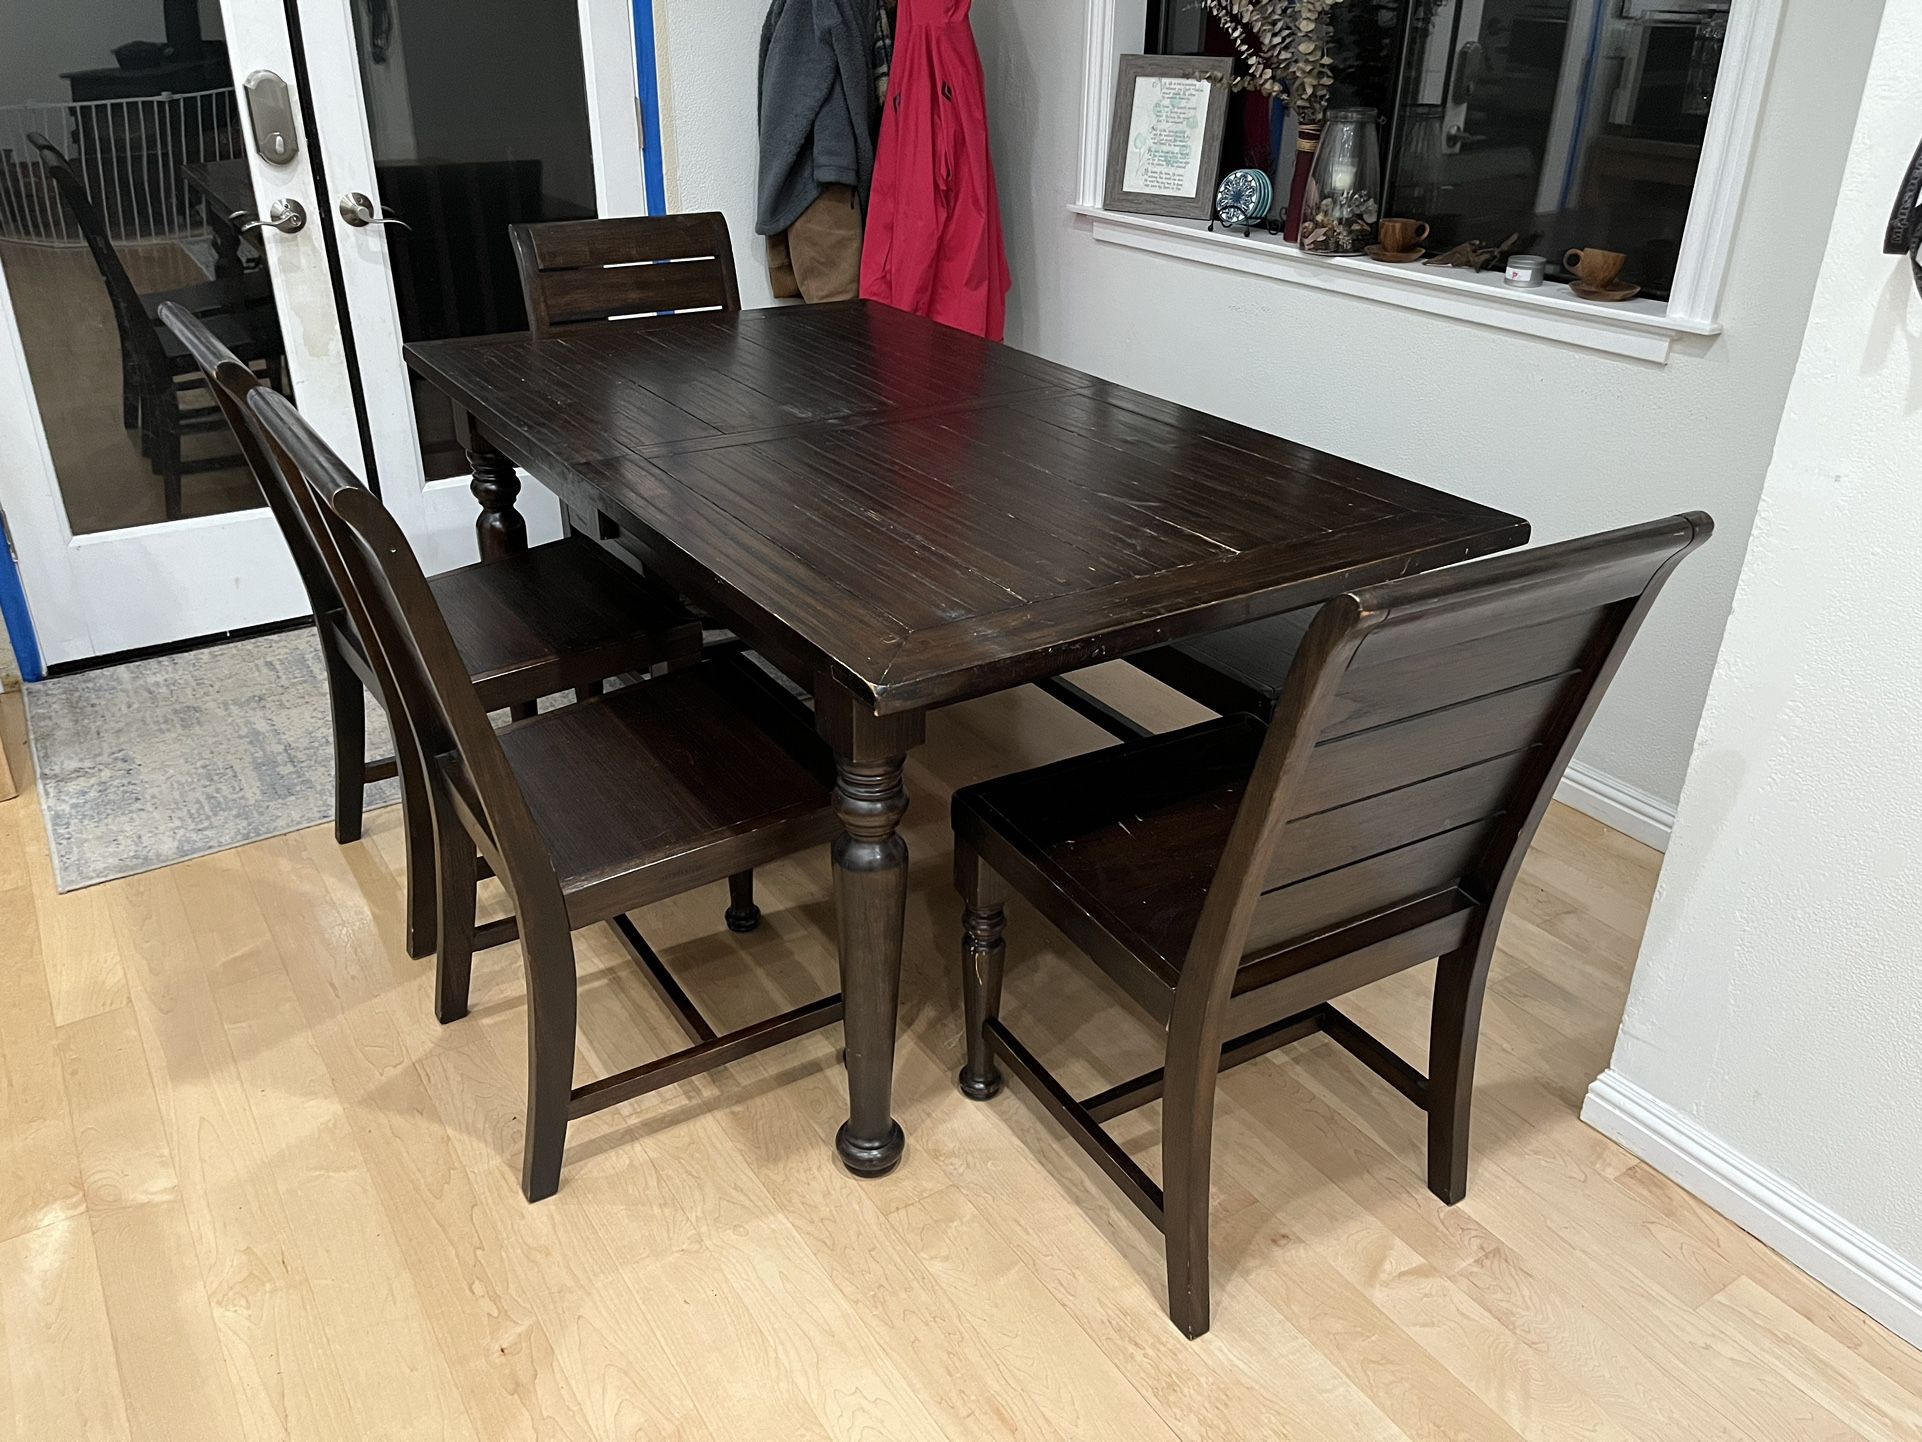 World Market Dining Table set w/ Extra Leaf, Chairs And Bench